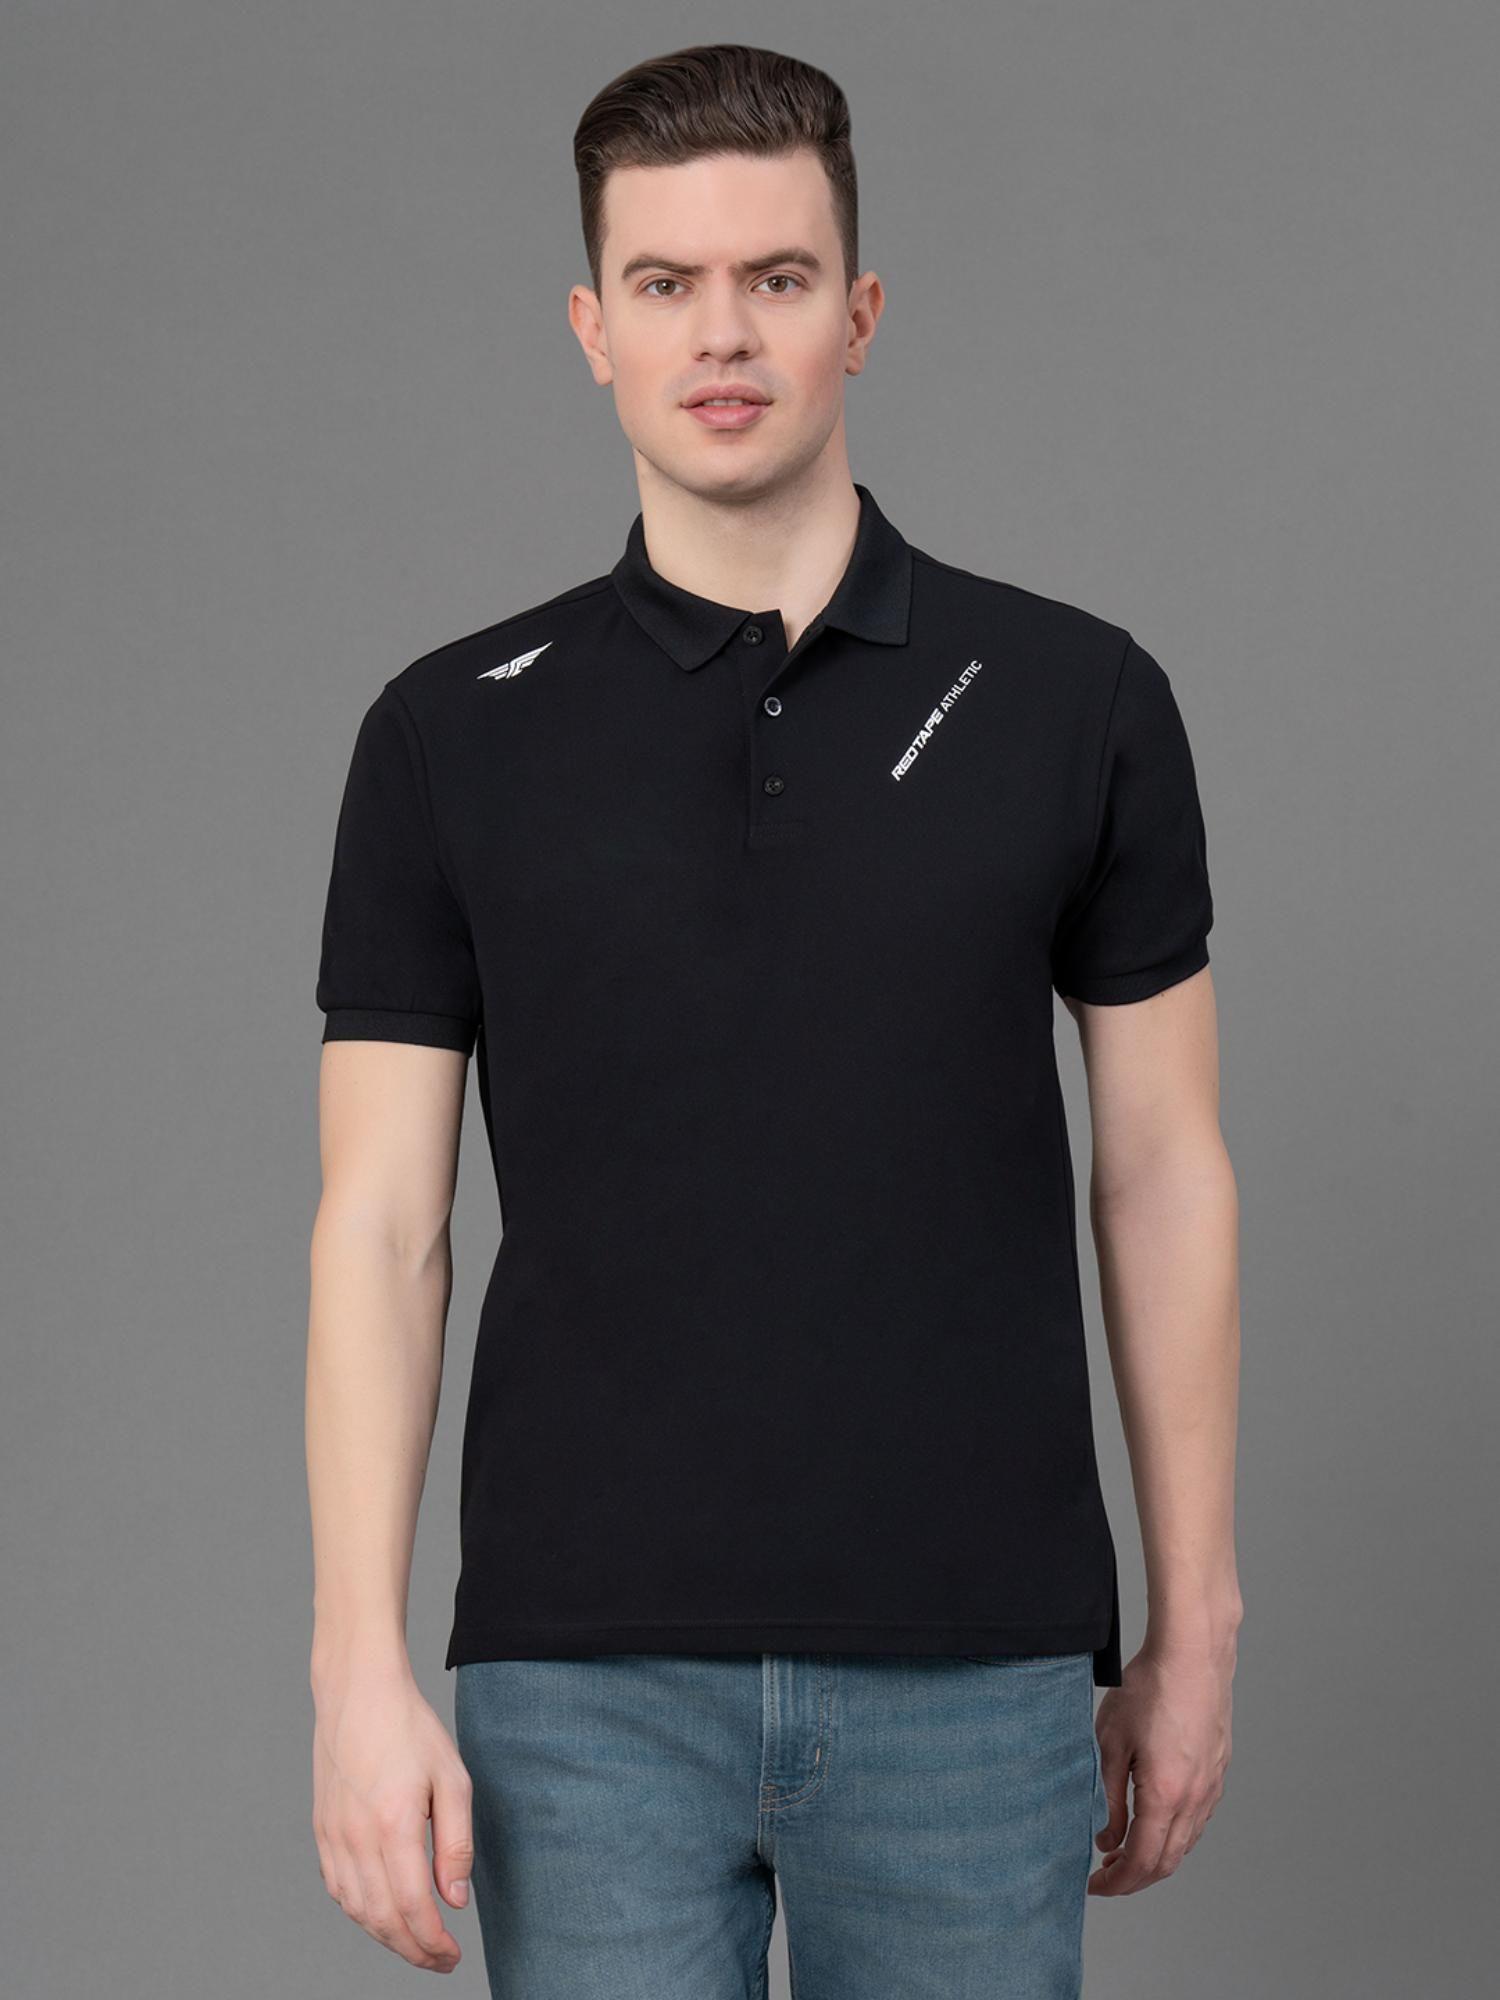 black polyester stretch printed mens activewear polo t-shirt